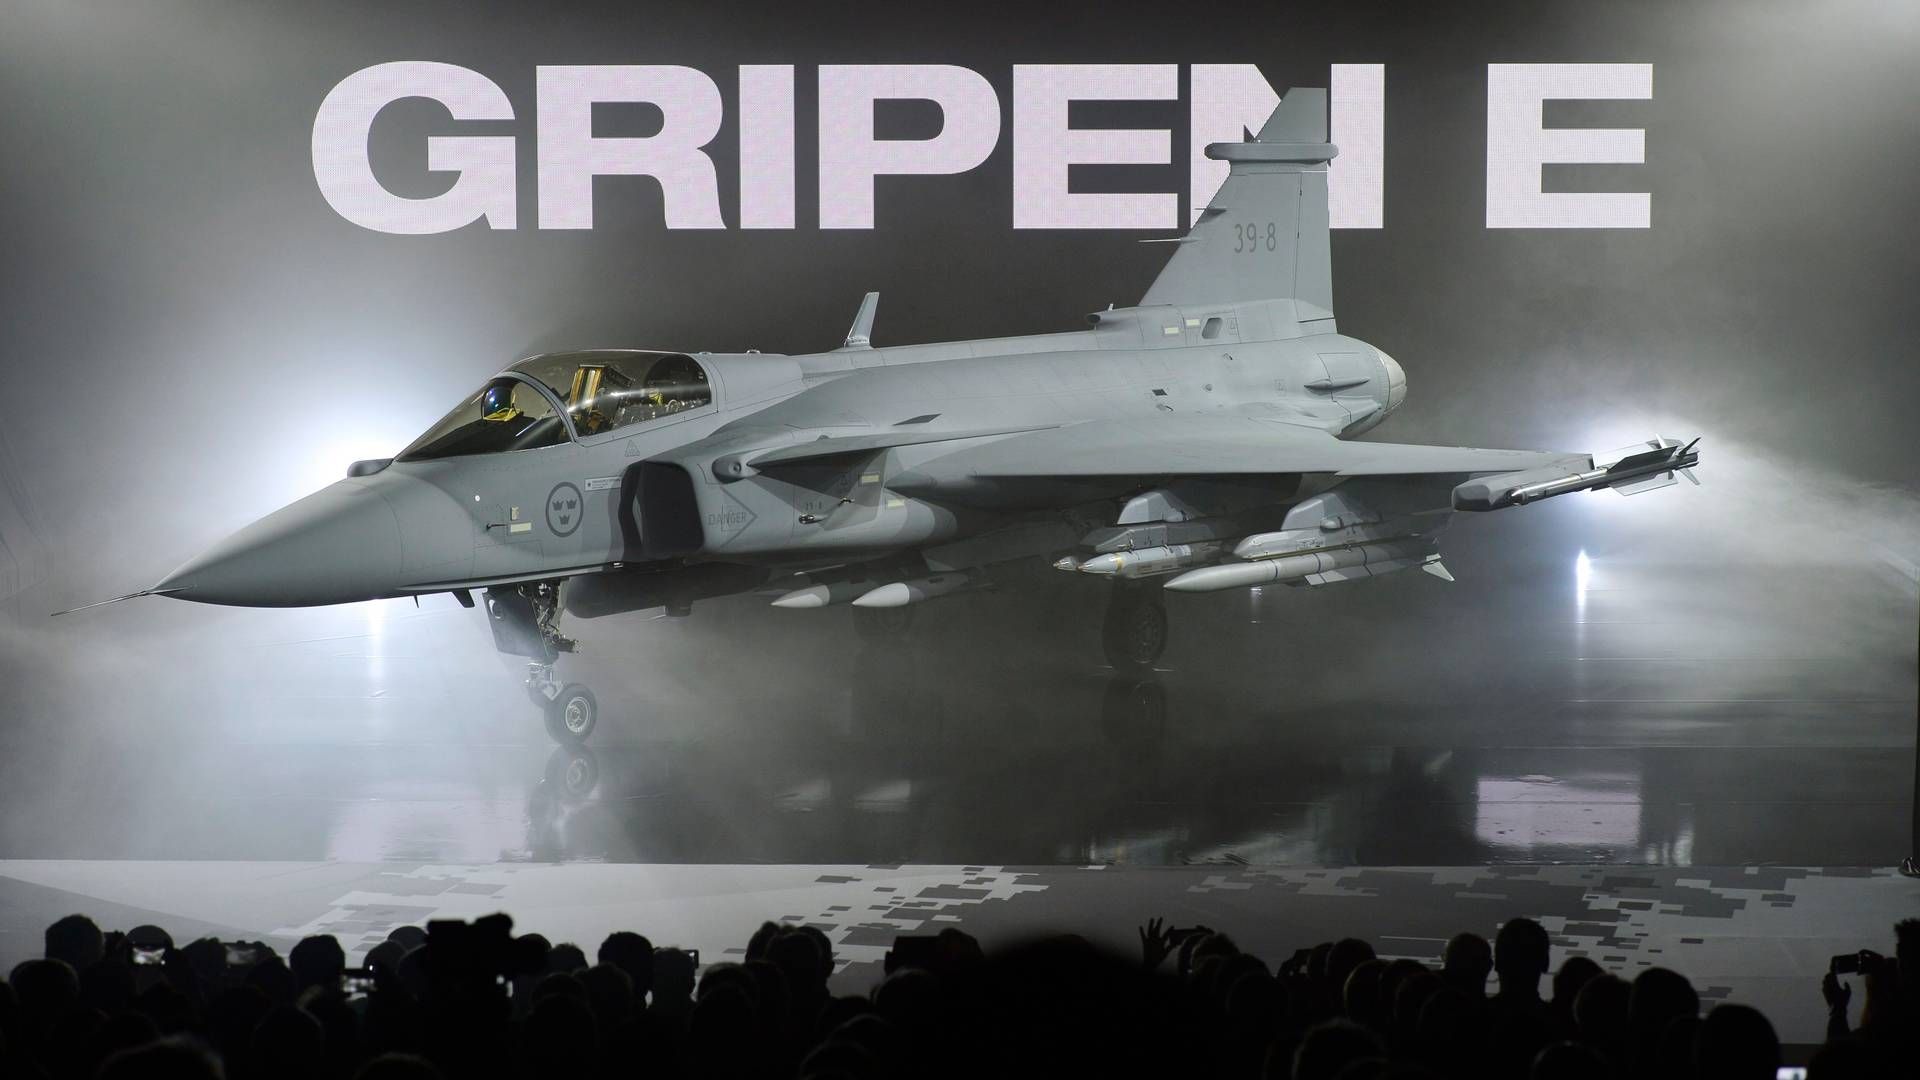 The new E version of the Swedish JAS 39 Gripen multi role fighter being rolled out at SAAB in Linkoping, Sweden. | Photo: Anders Wiklund/AP/Ritzau Scanpix